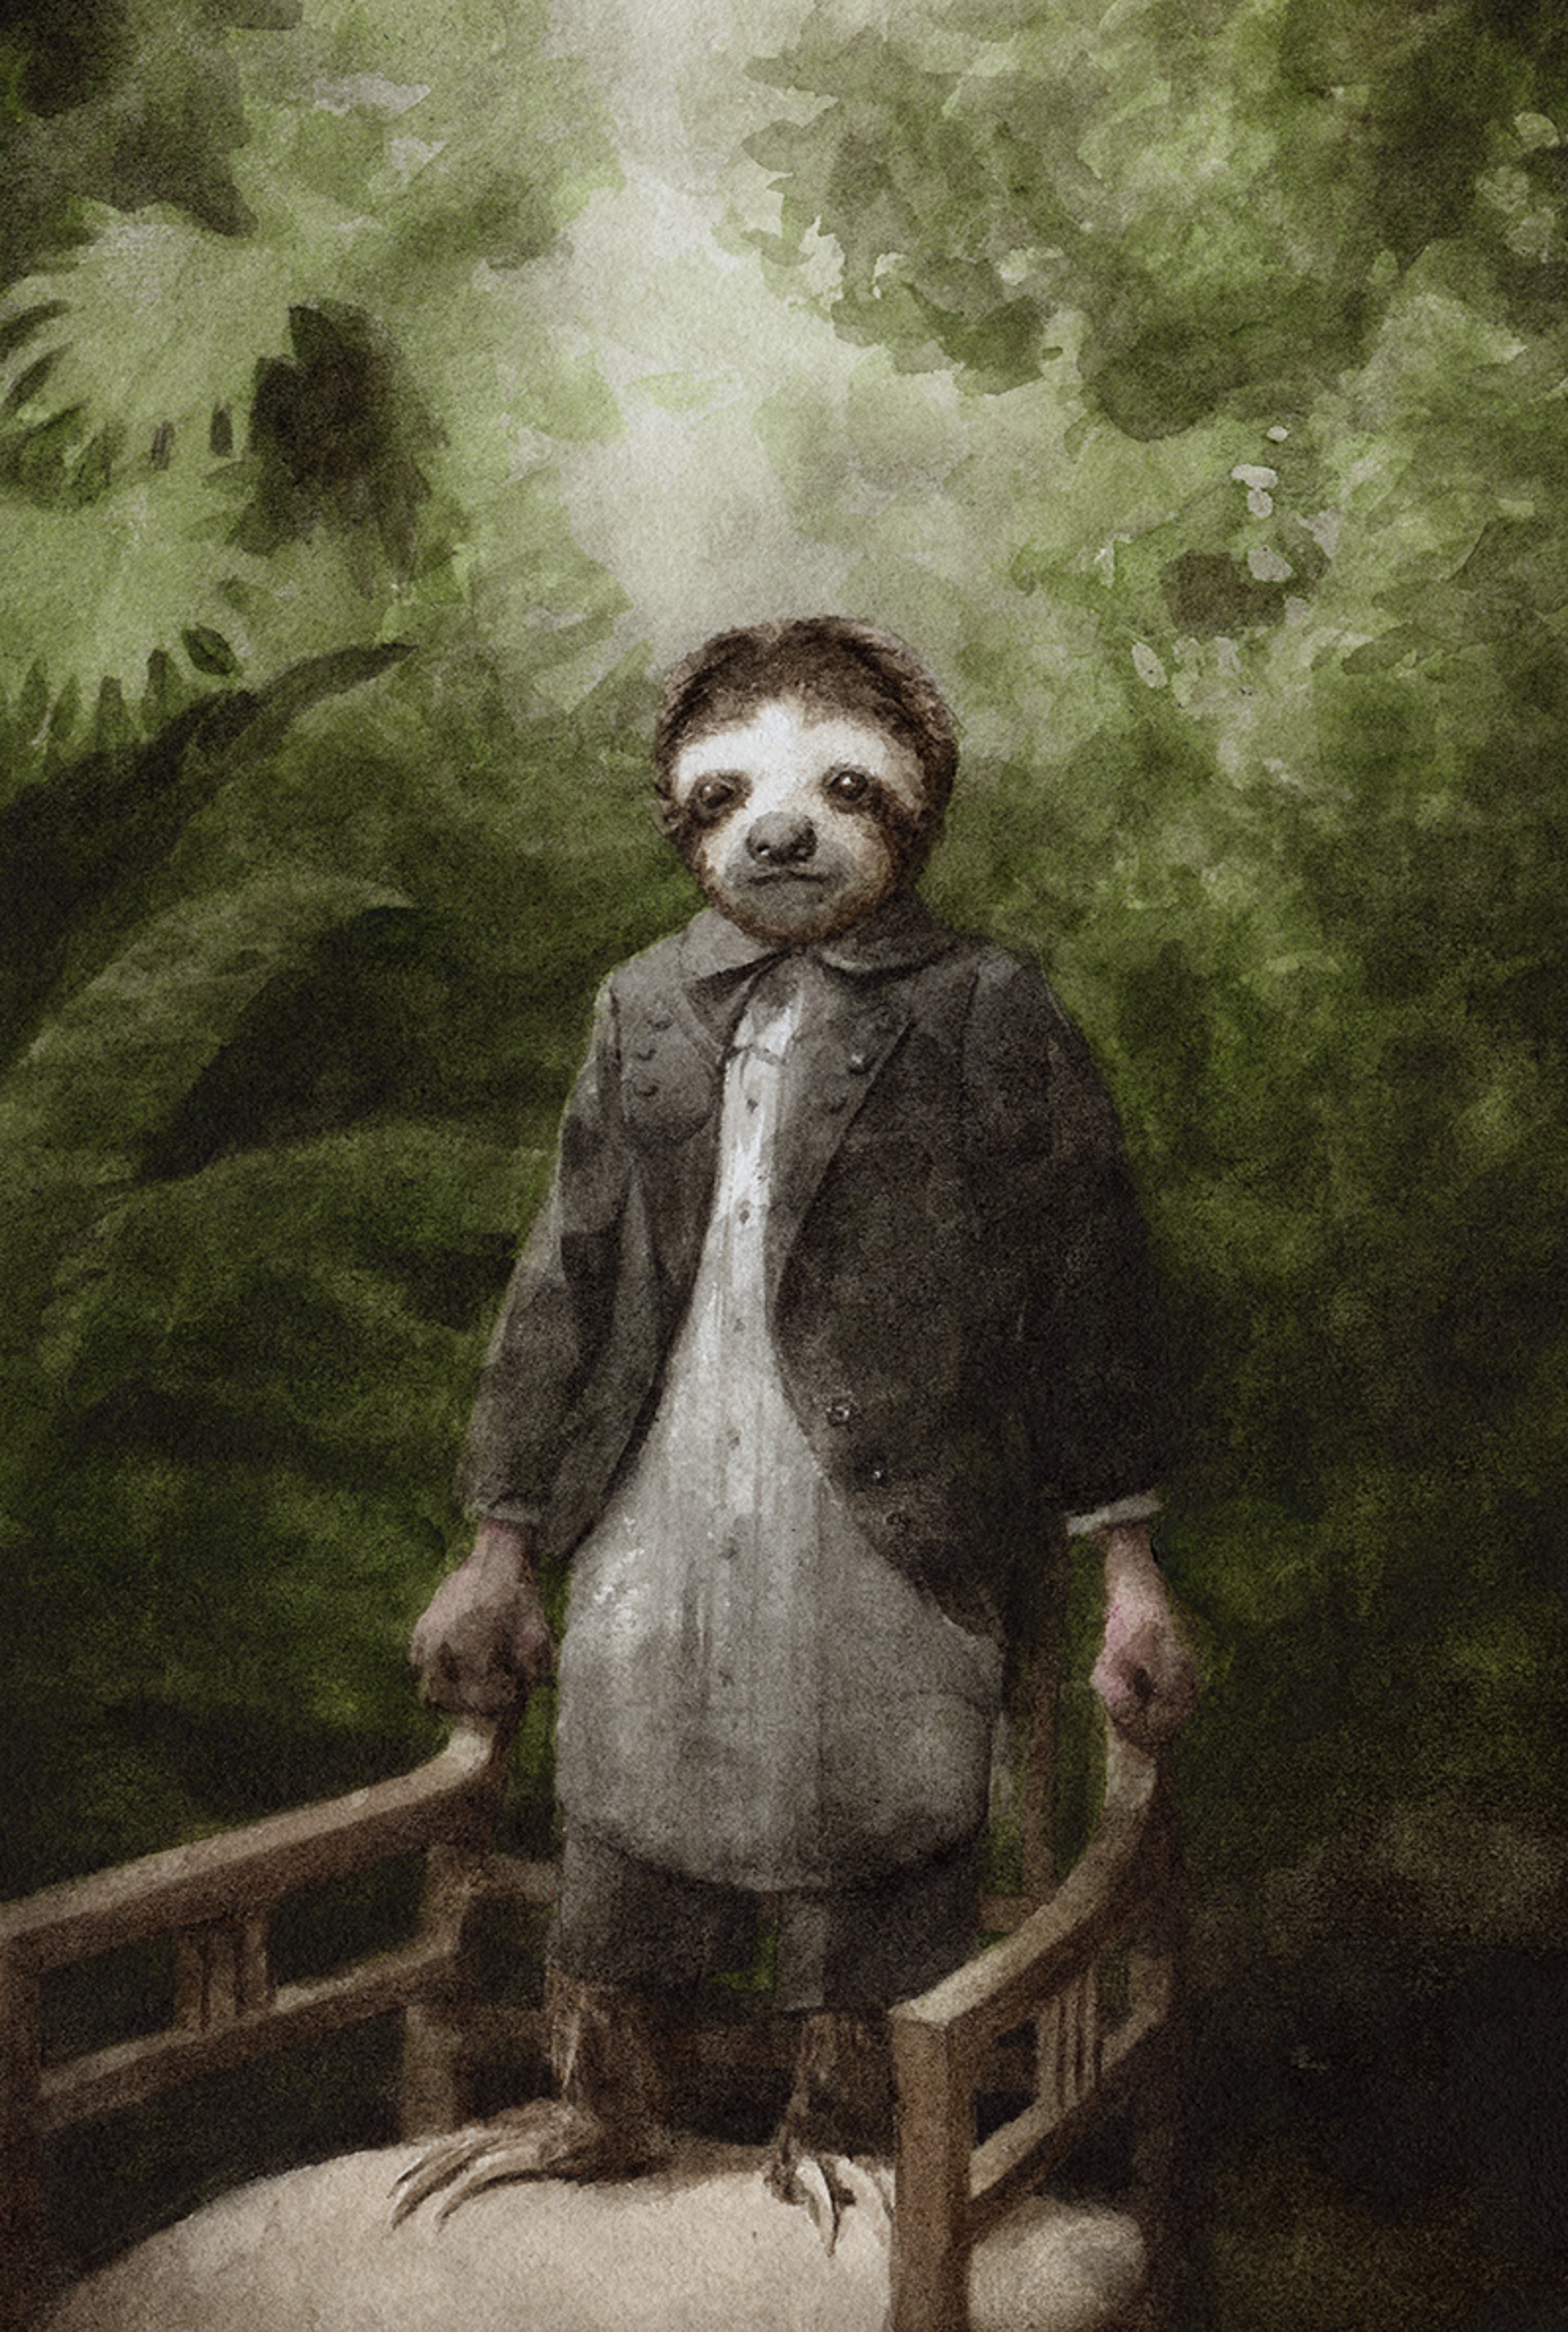 Island of Dr. Moreau - Sloth by Benz and Chang